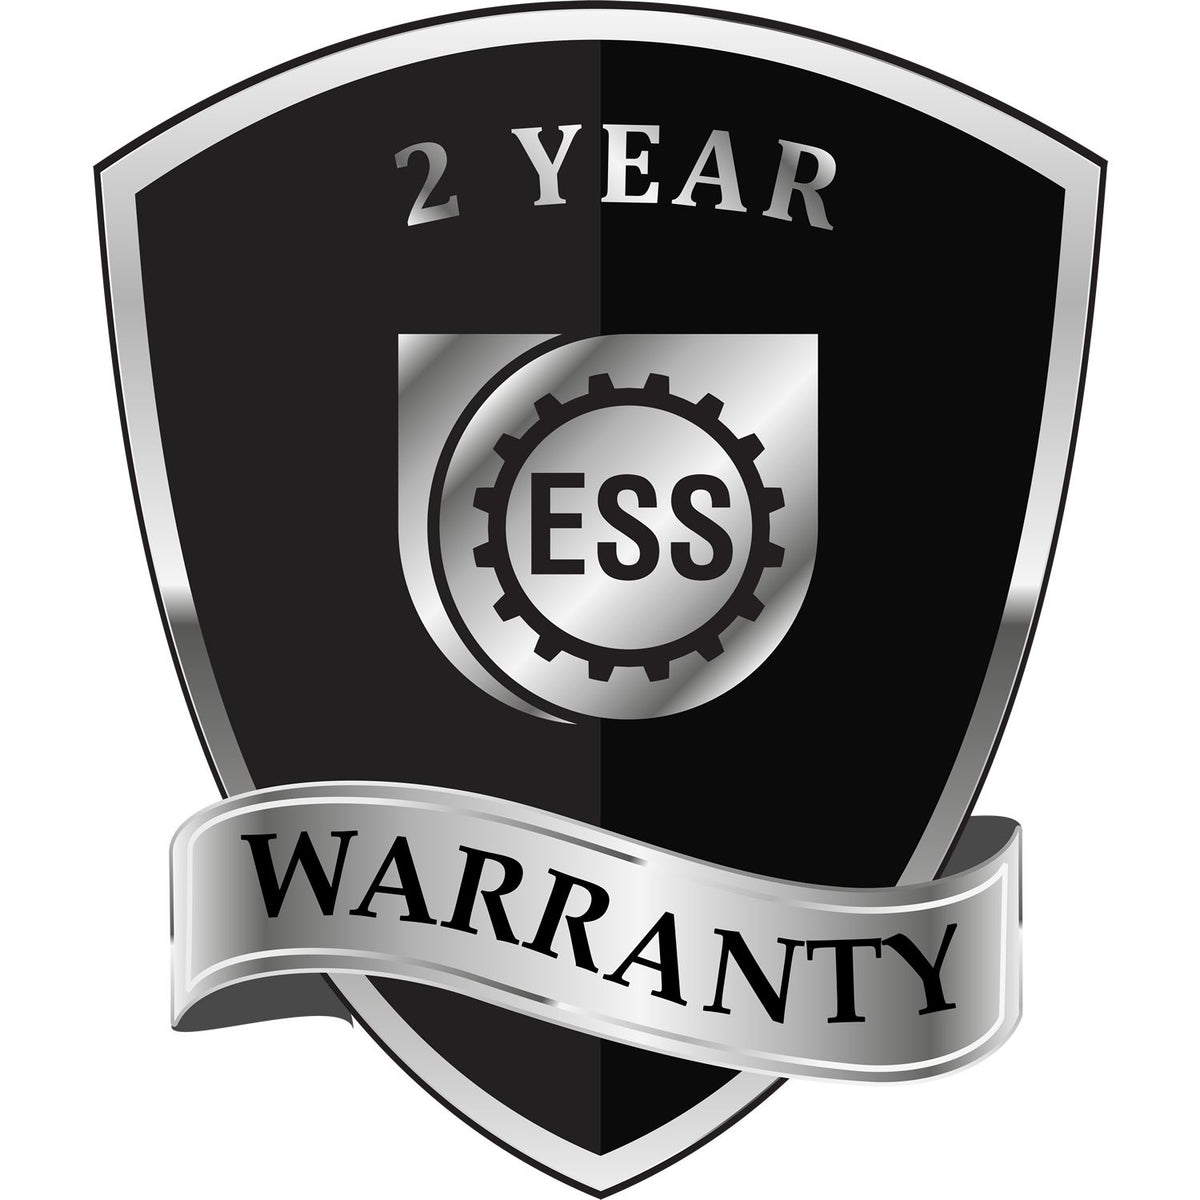 A black and silver badge or emblem showing warranty information for the State of Colorado Extended Long Reach Geologist Seal